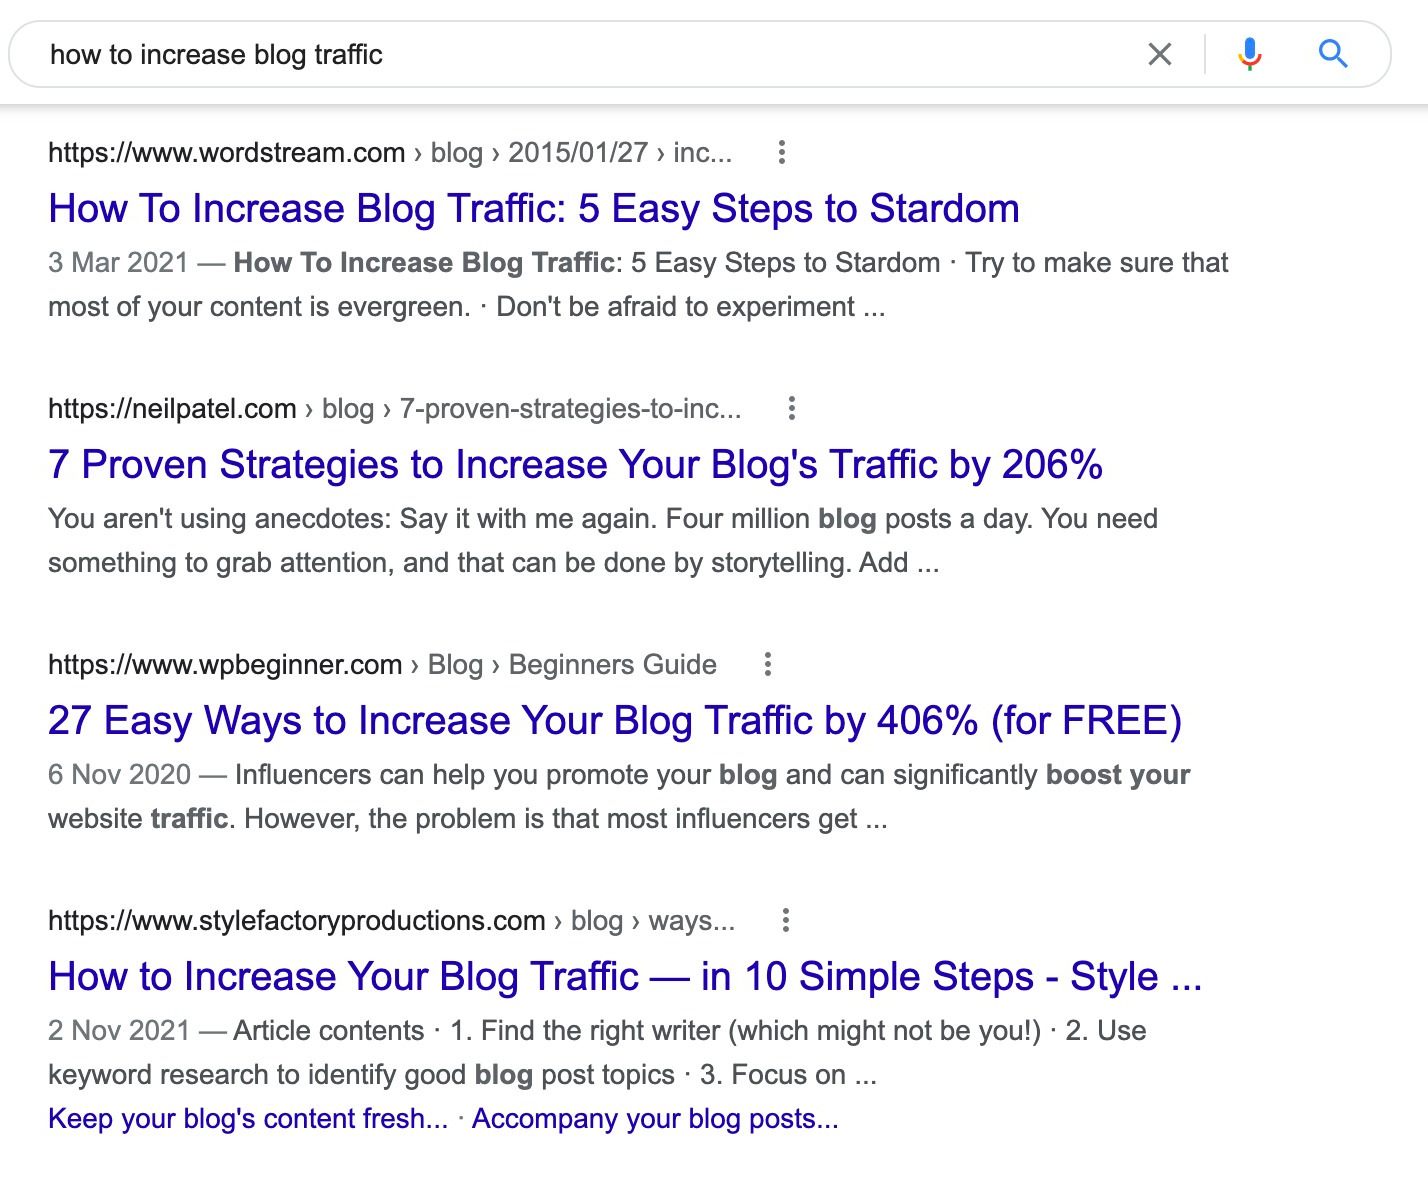 Google SERP of "how to increase blog traffic"